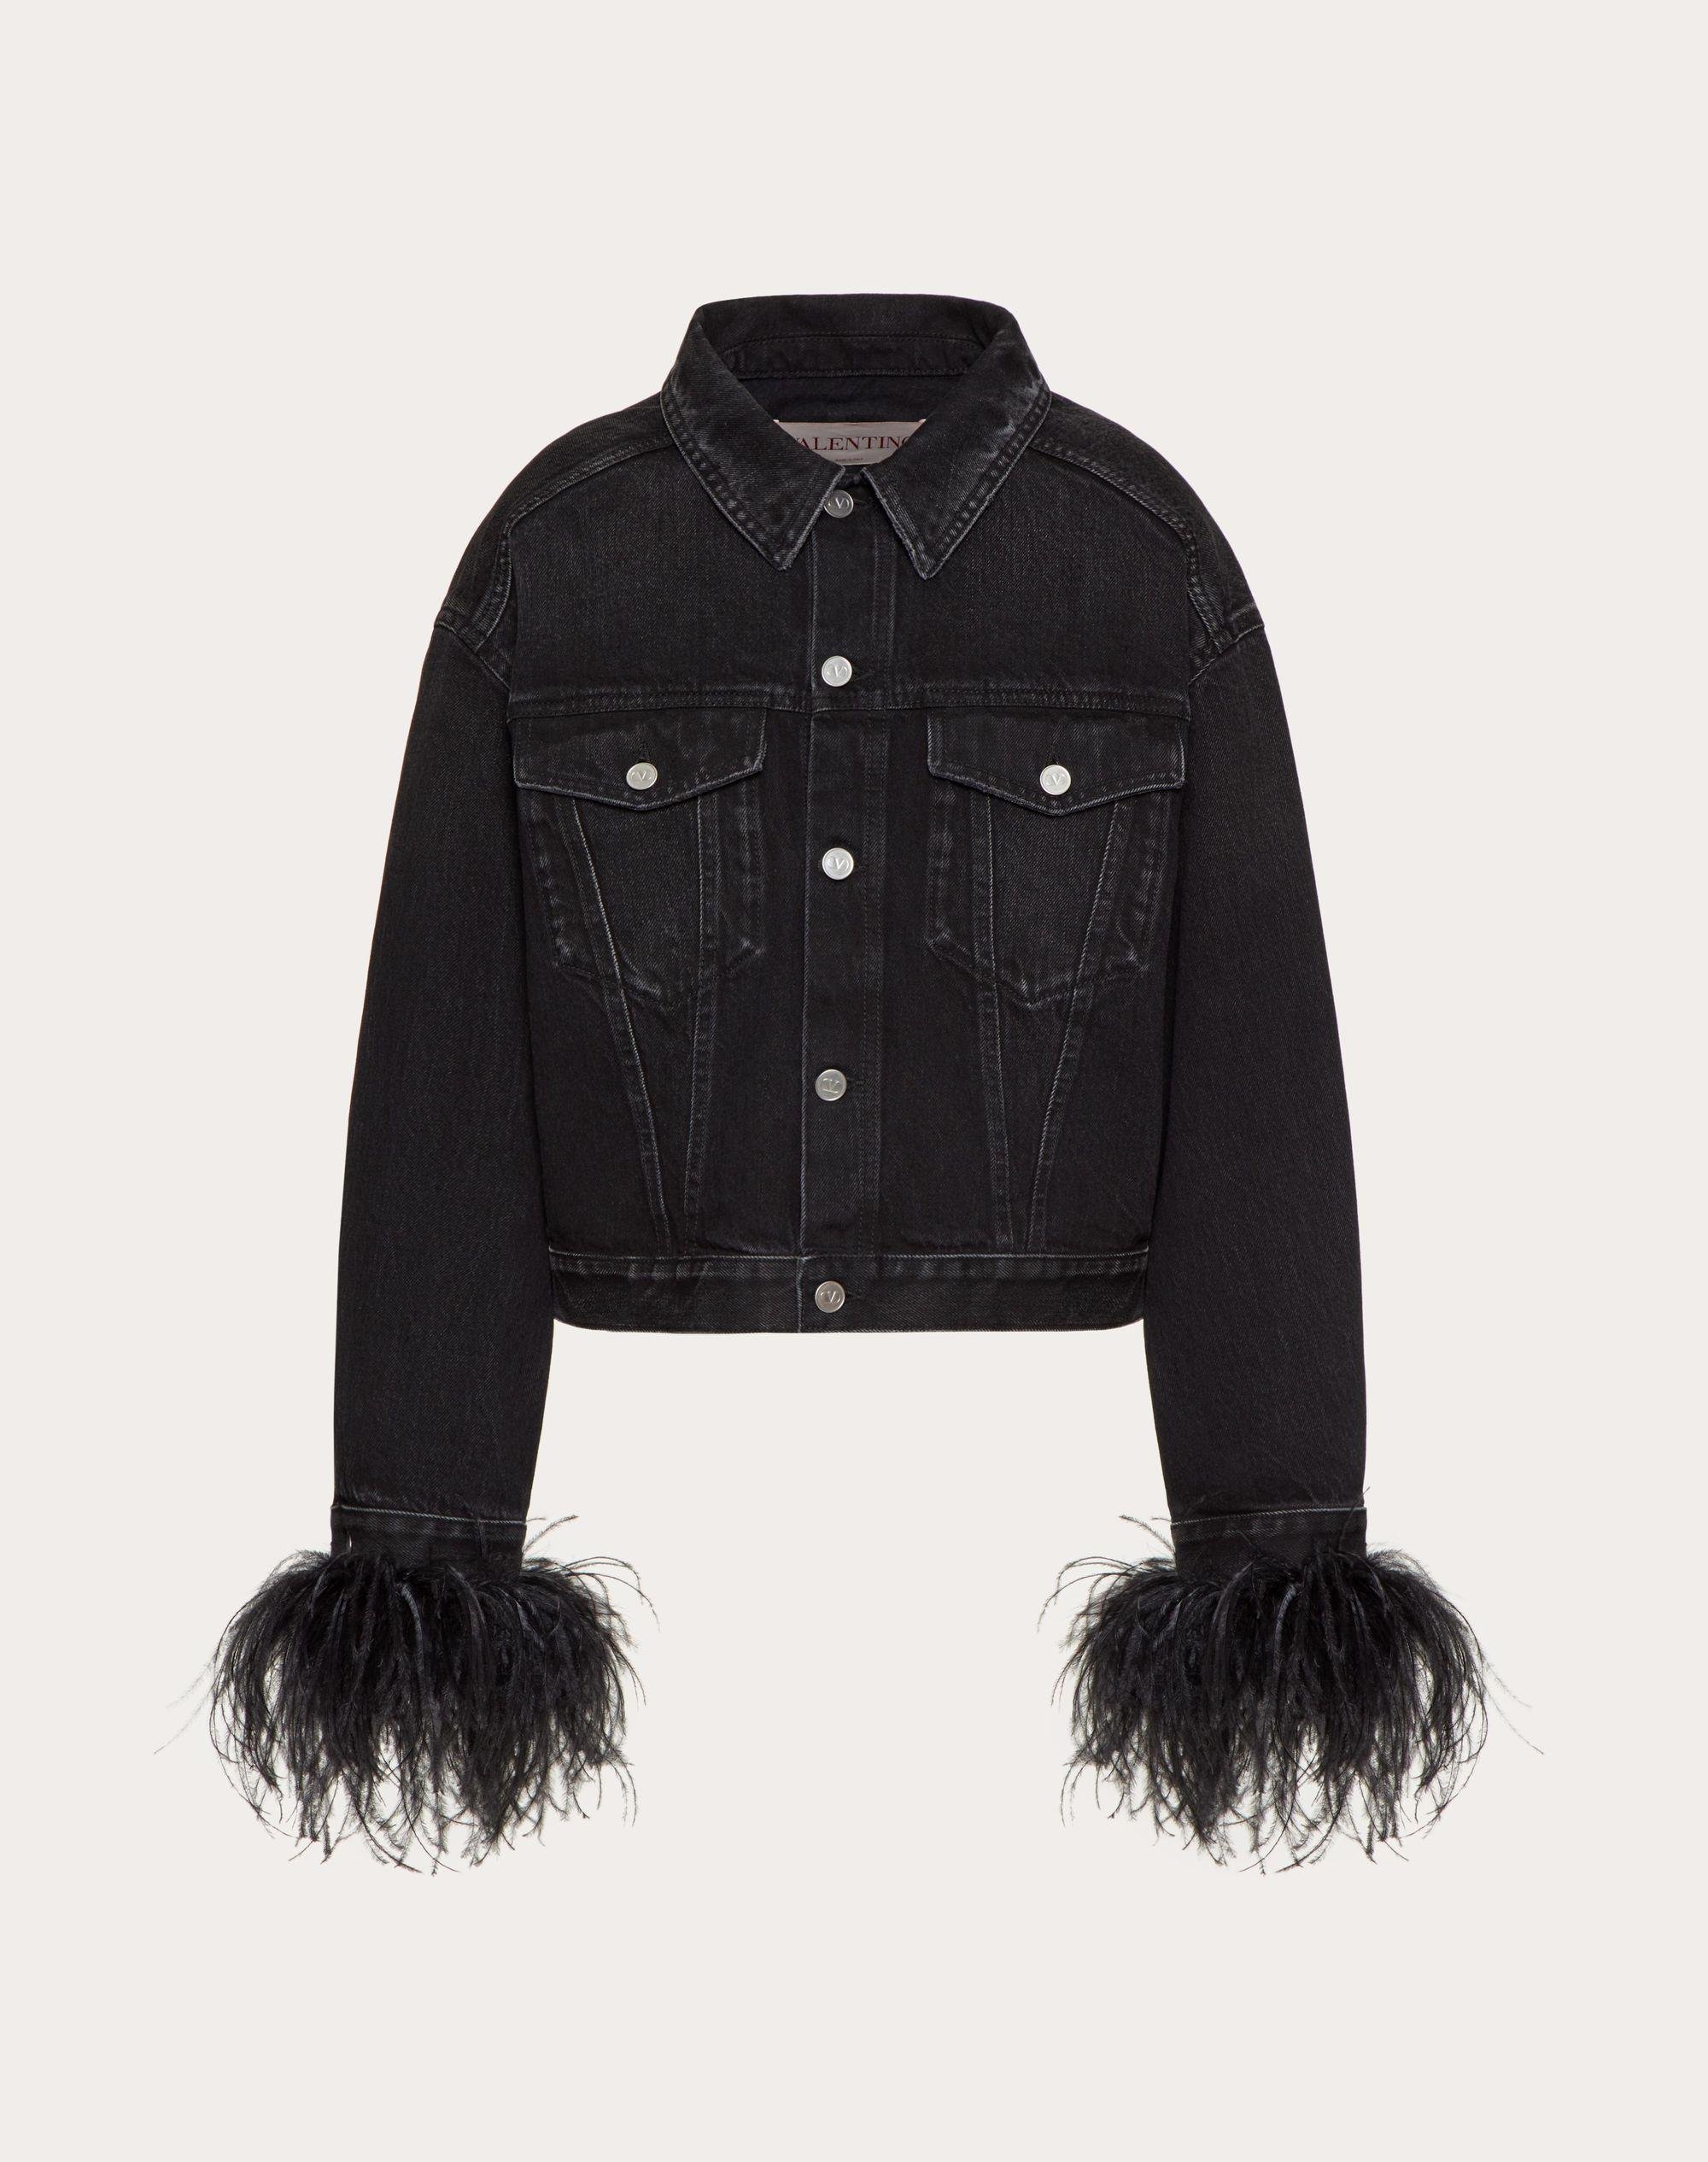 Valentino Embroidered Denim Jacket With Feathers in Black   Lyst